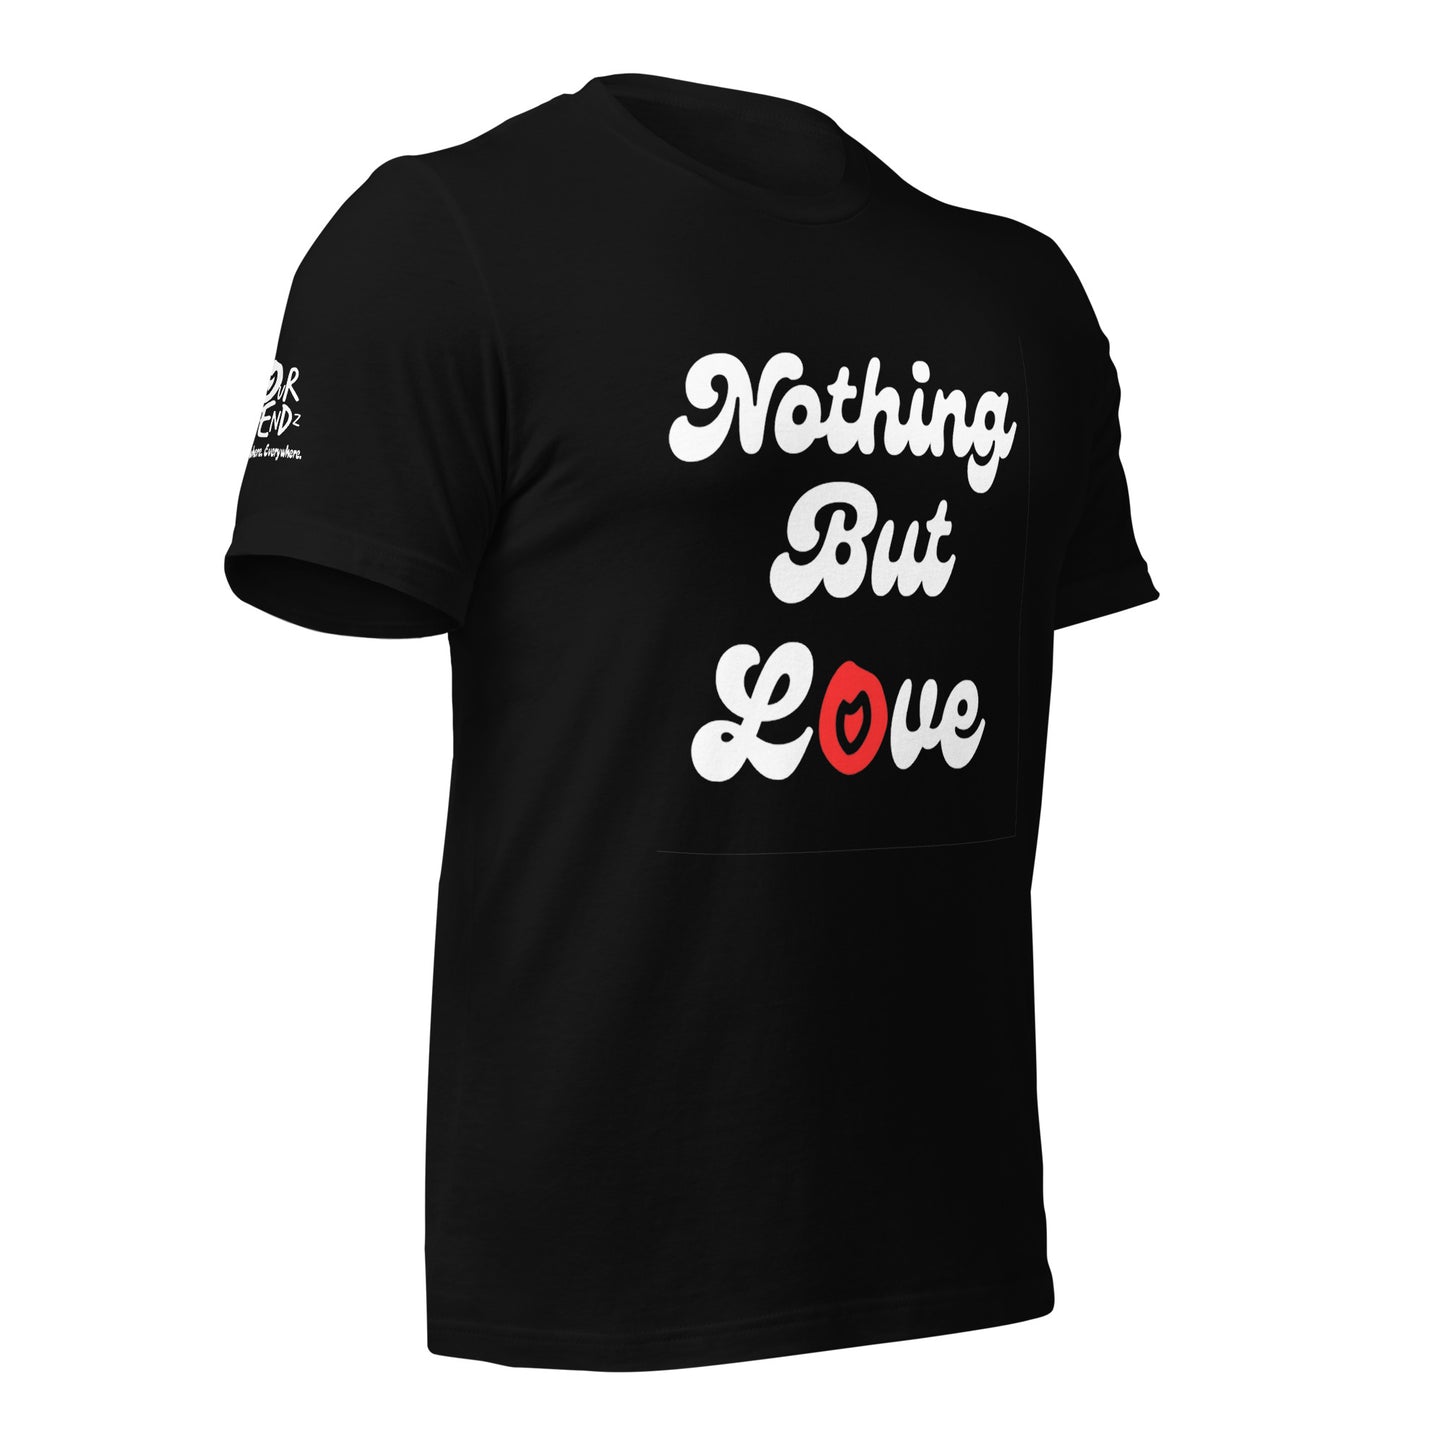 Nothing But Love Unisex Tee